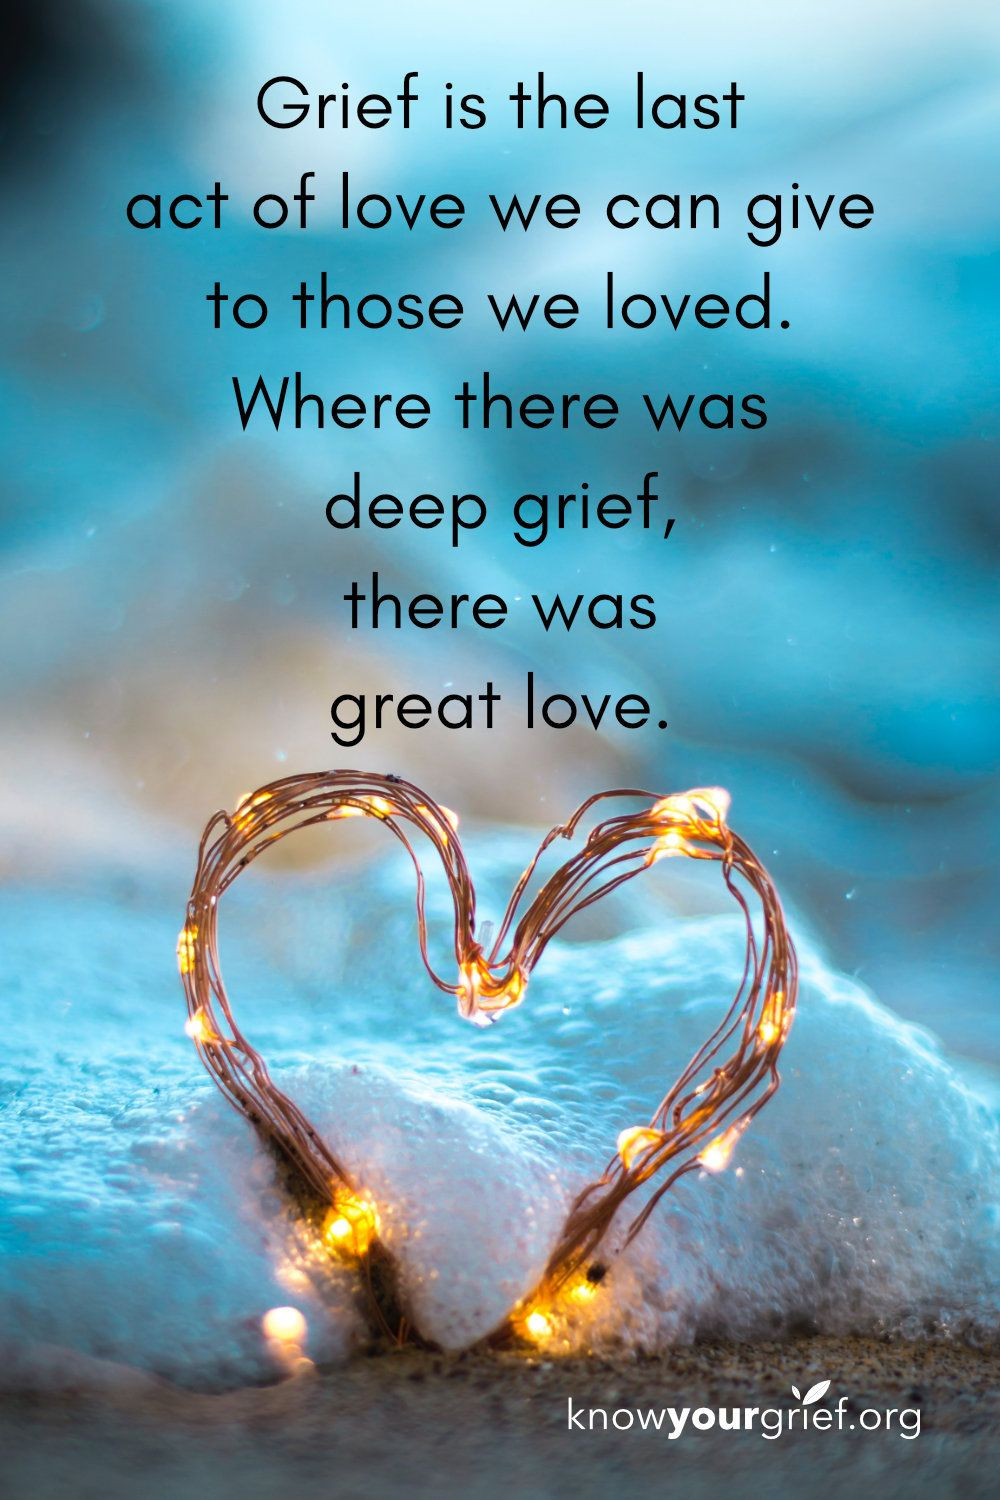 Quotes About Love And Loss
 Grief quote “Grief is the last act of love we can give to